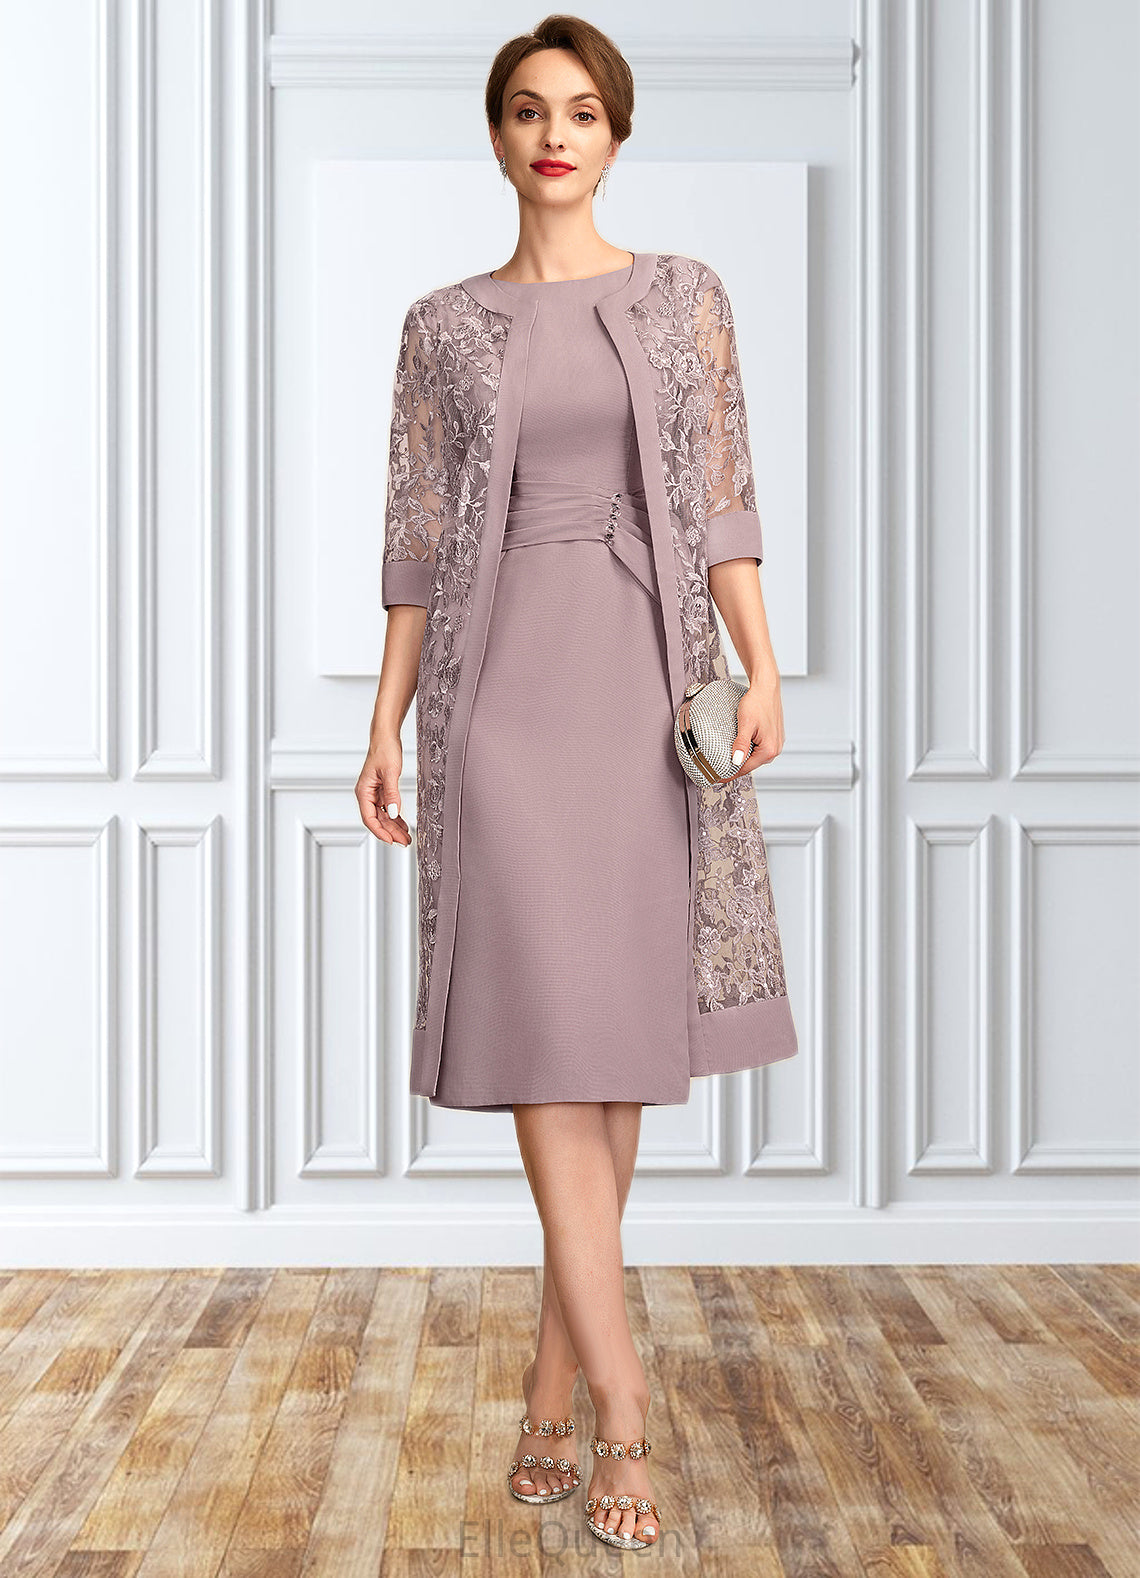 Serenity Sheath/Column Scoop Neck Knee-Length Chiffon Mother of the Bride Dress With Ruffle Sequins DG126P0015023